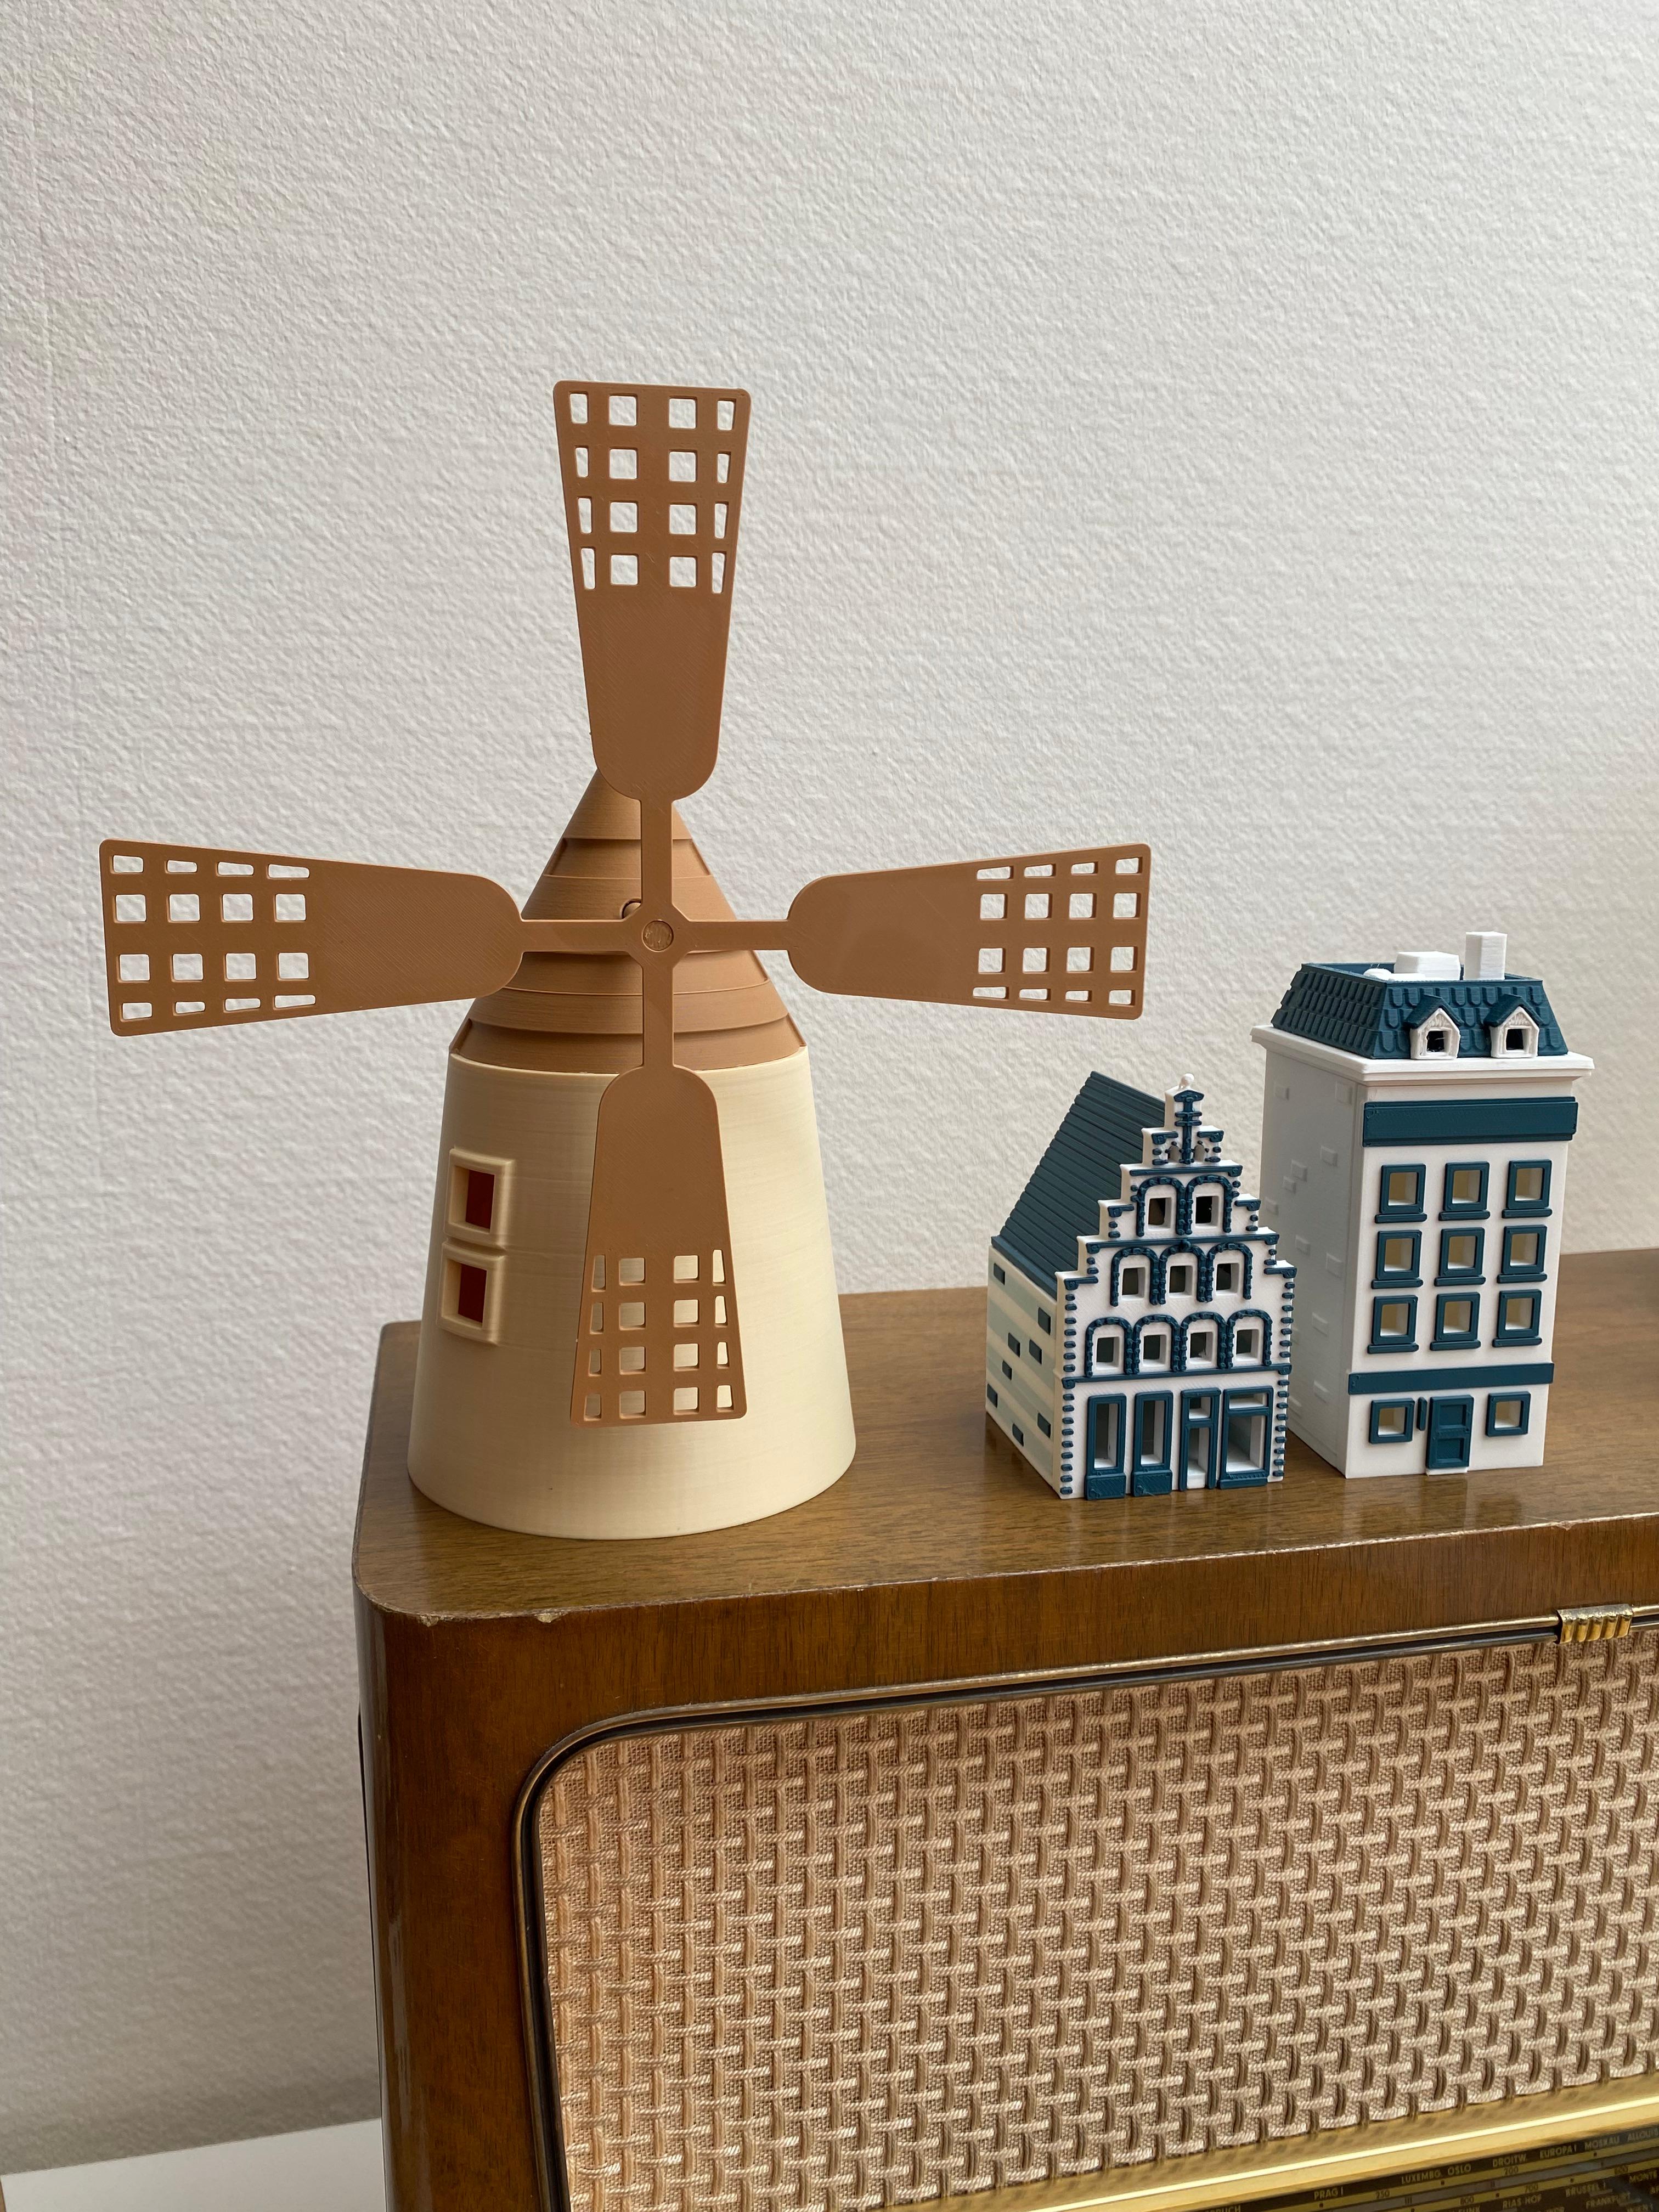 Windmill 1.4 - Thank you for the design! Just love it! Beautiful eyecatcher in the interior!
0.20mm bambulab.
Filament:
Polymaker cream & wood brown - 3d model